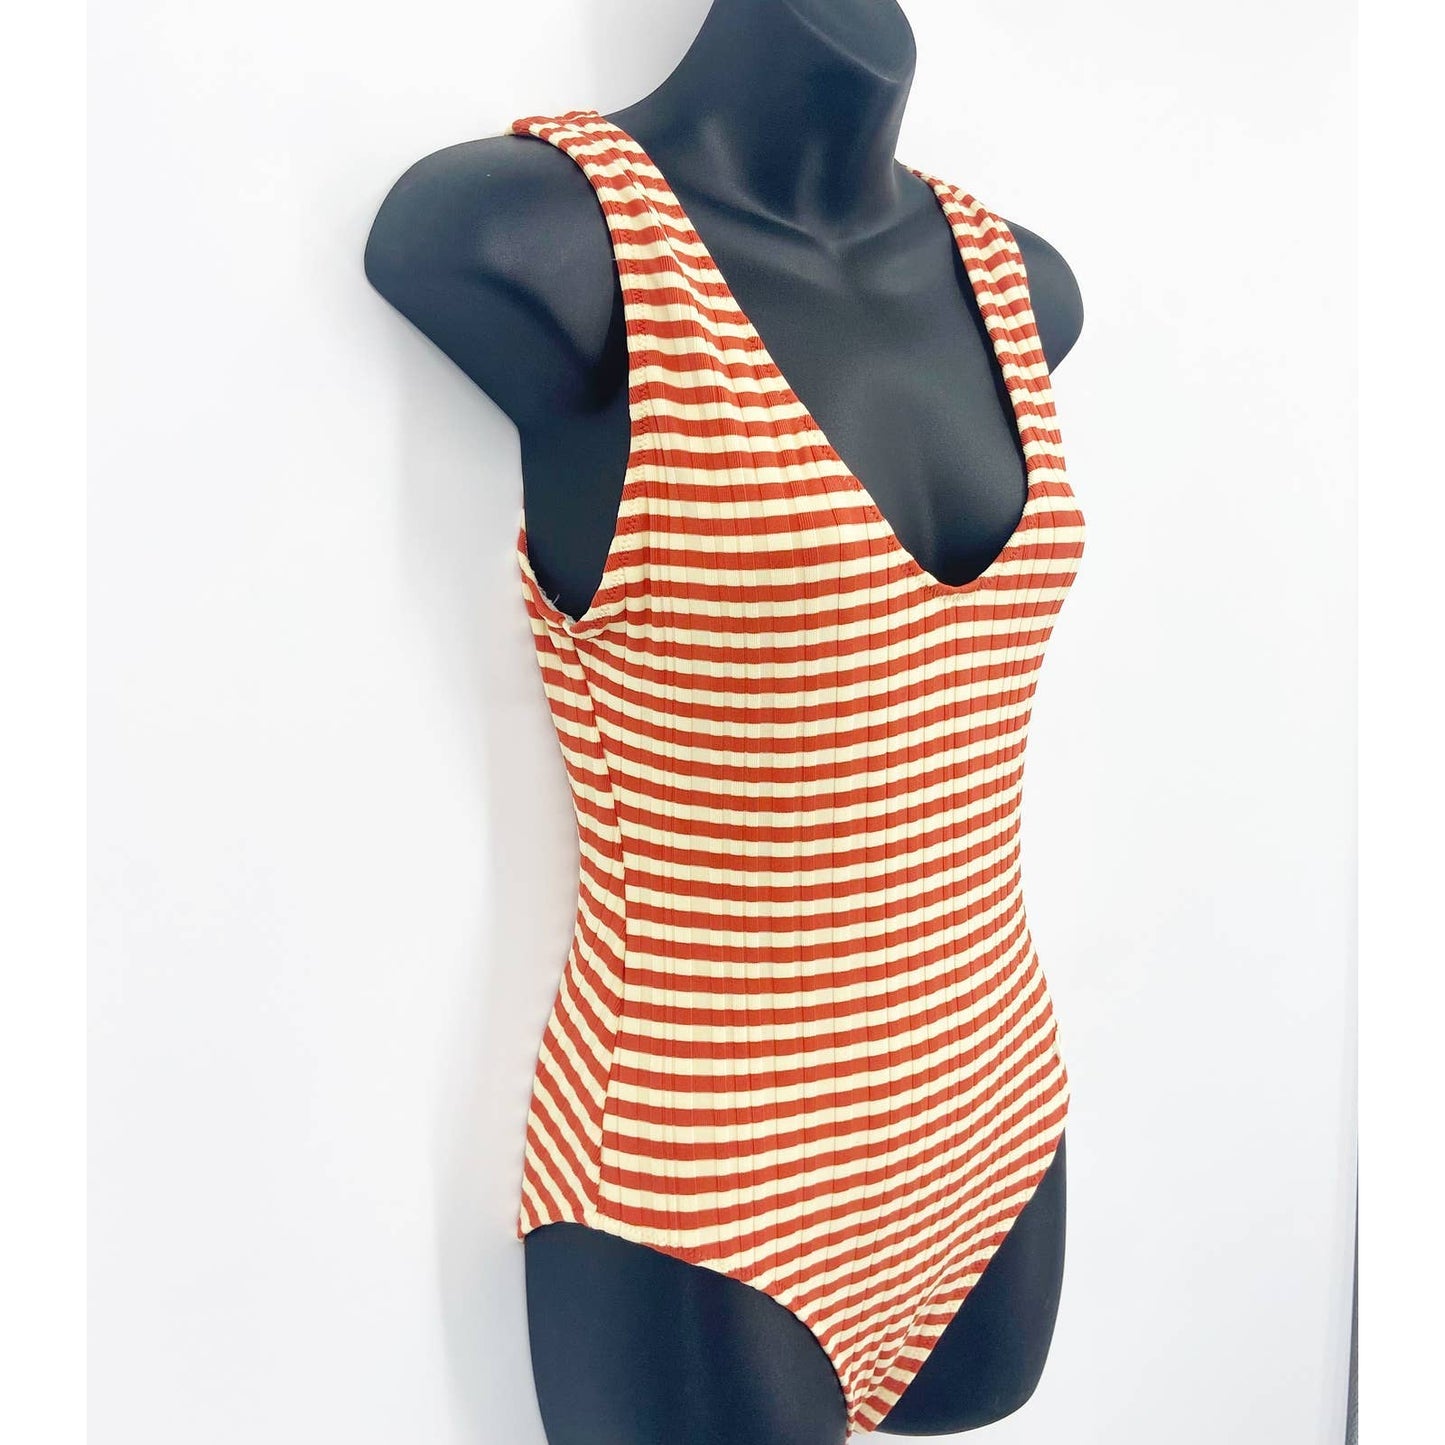 Solid & Striped One Piece Striped Low Back Swimsuit Bathing Suit Orange Small